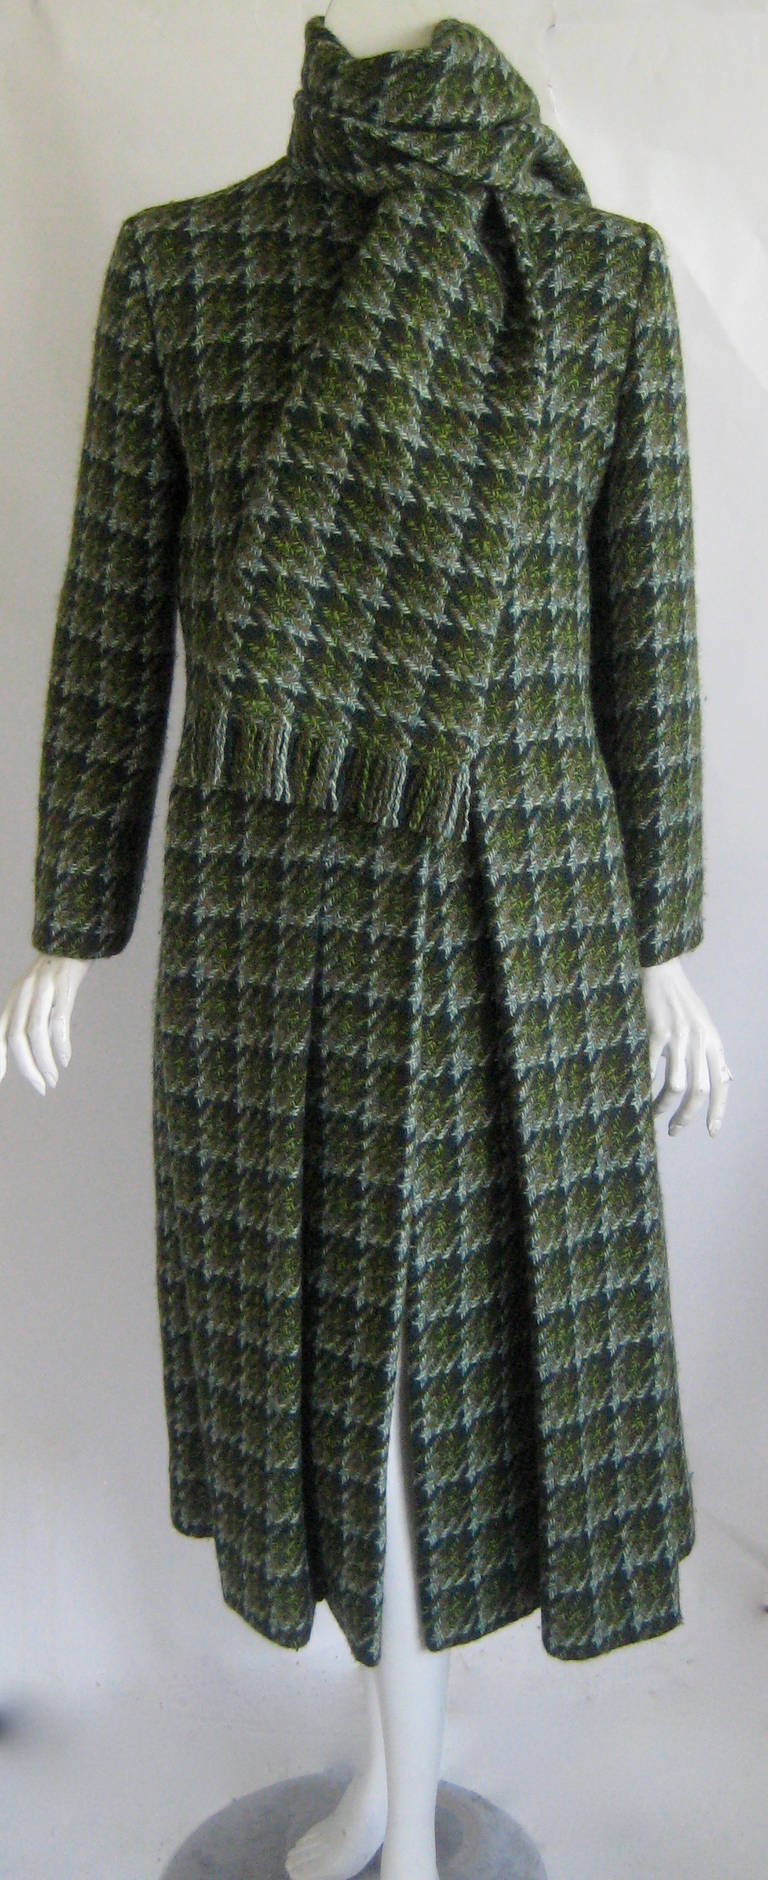 Wonderful wool tweed 
Attached neck scarf 
Silver dome buttons very similar to those used by Cardin in the 60s
2 side pockets 
Pleated skirt
Coat is in exceptional condition and looks unworn